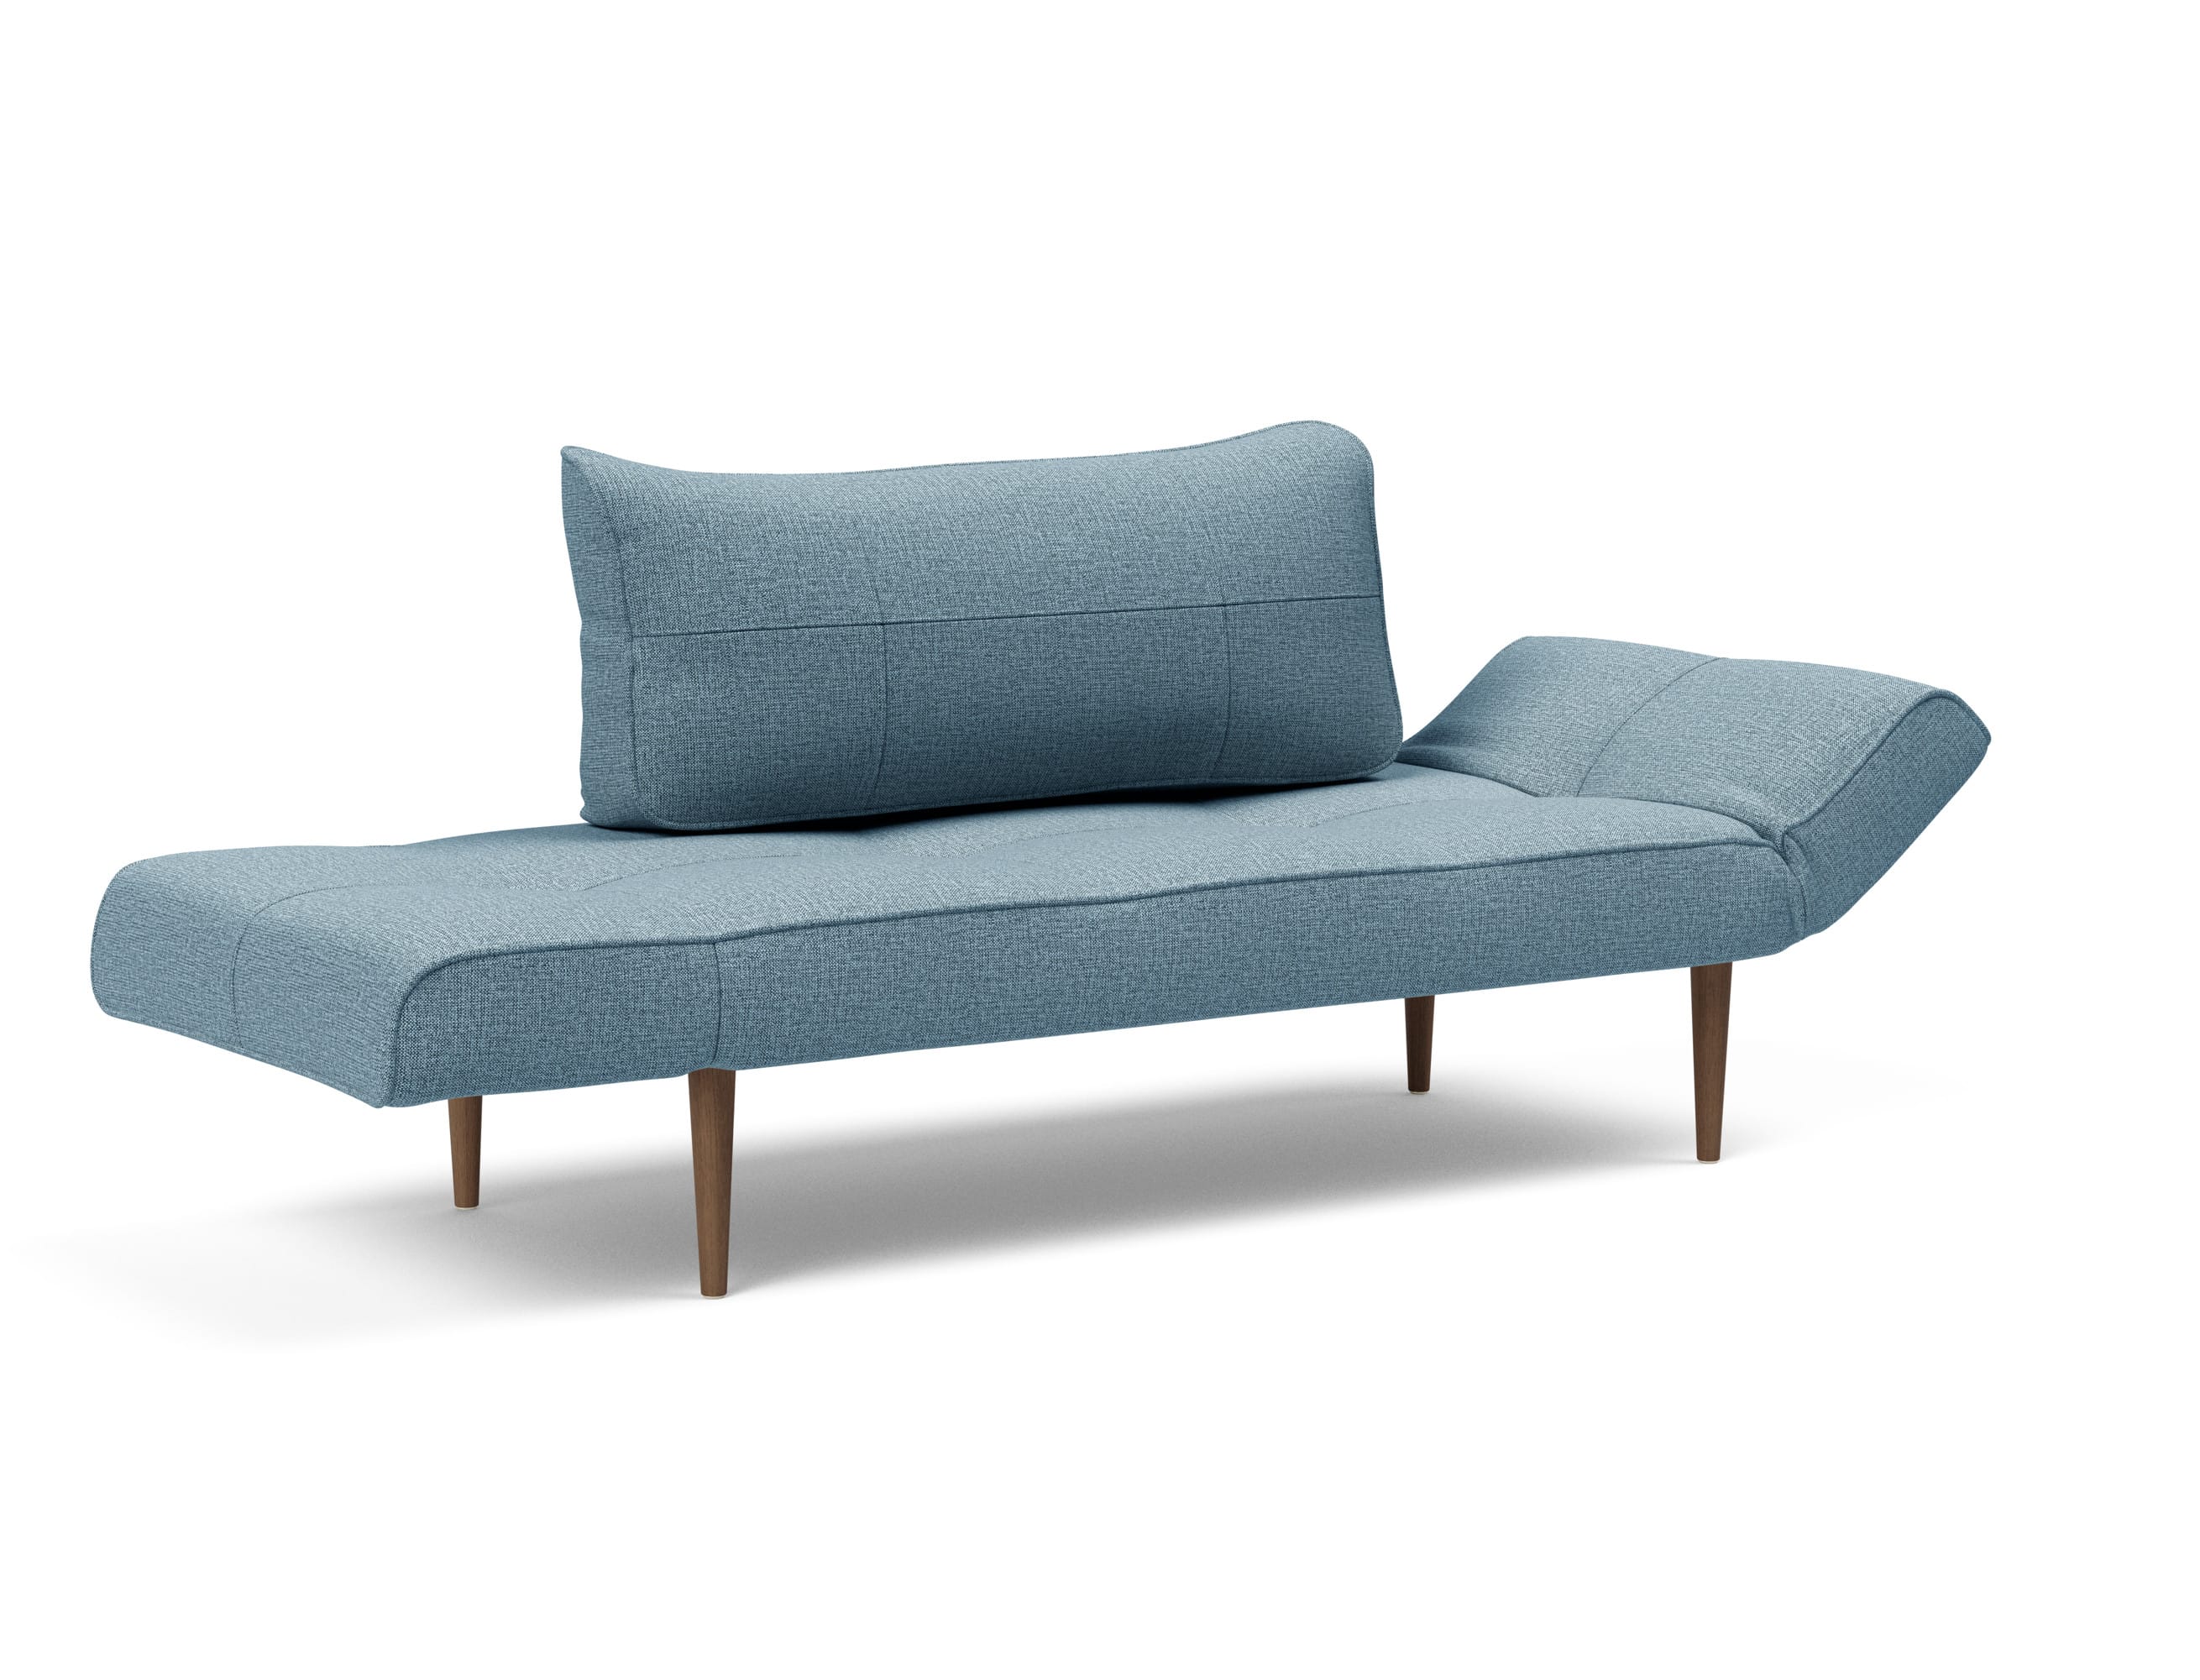 Zeal Deluxe Daybed by Innovation Mixed Light Blue Dance Bed Sofa